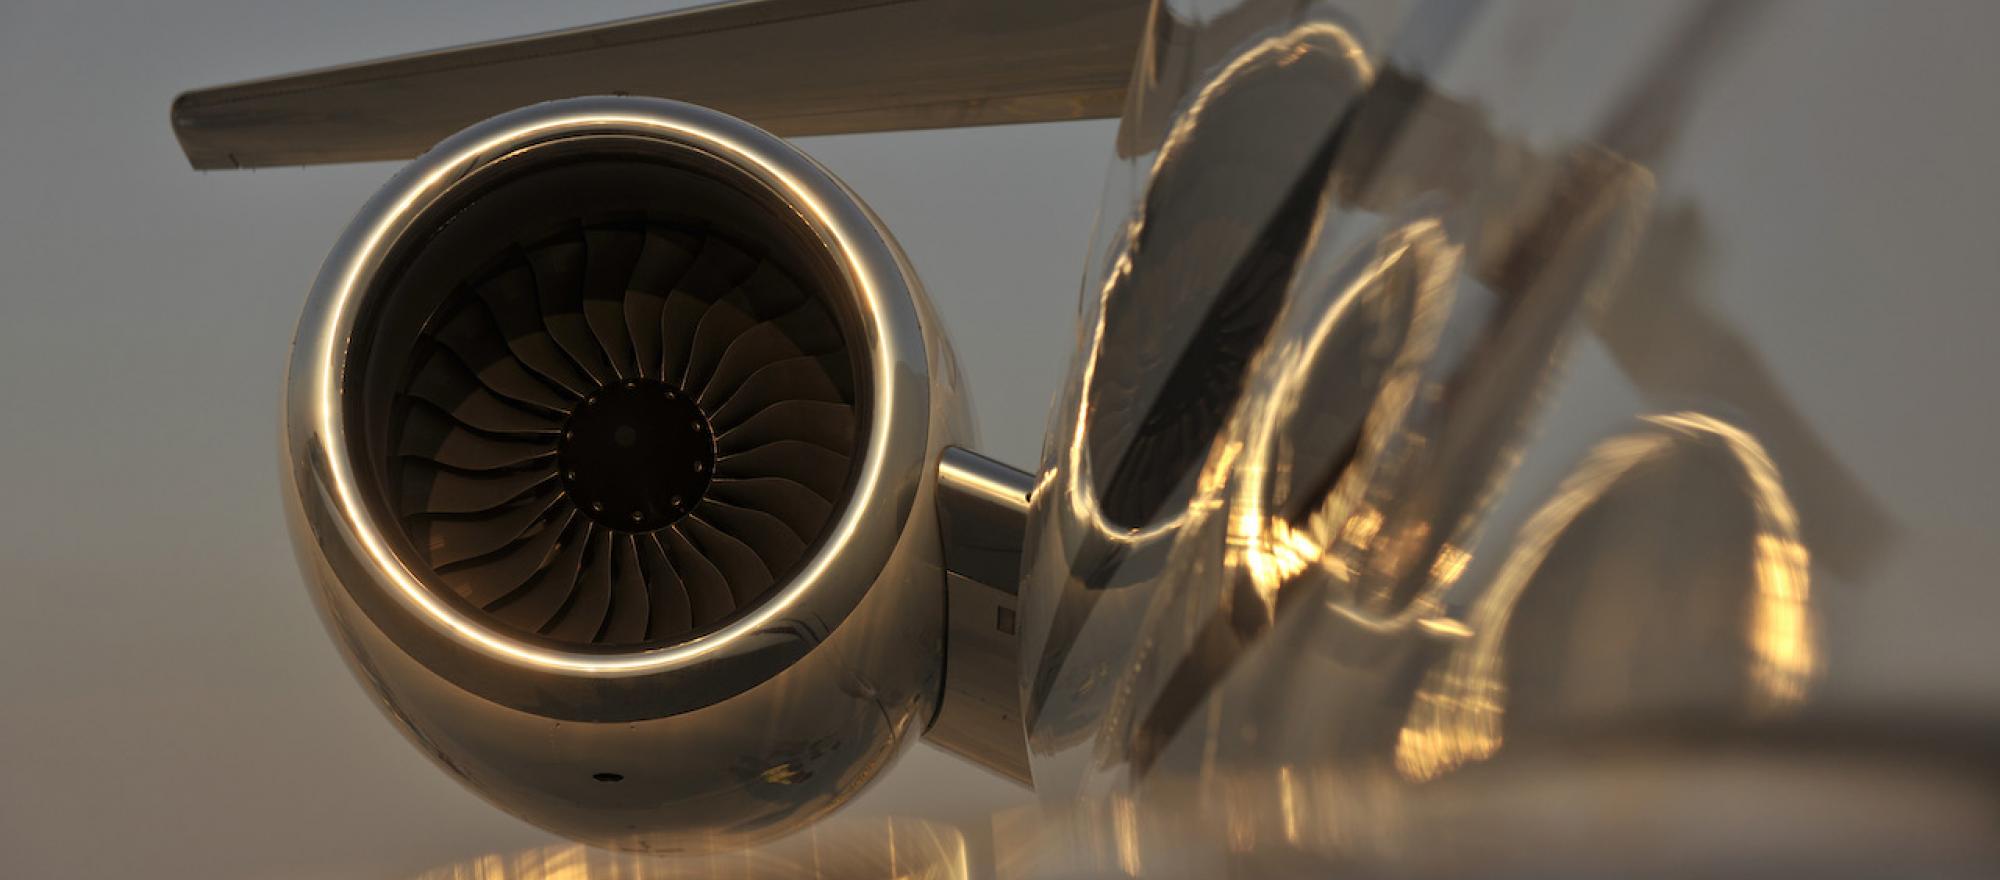 view of engine on business jet